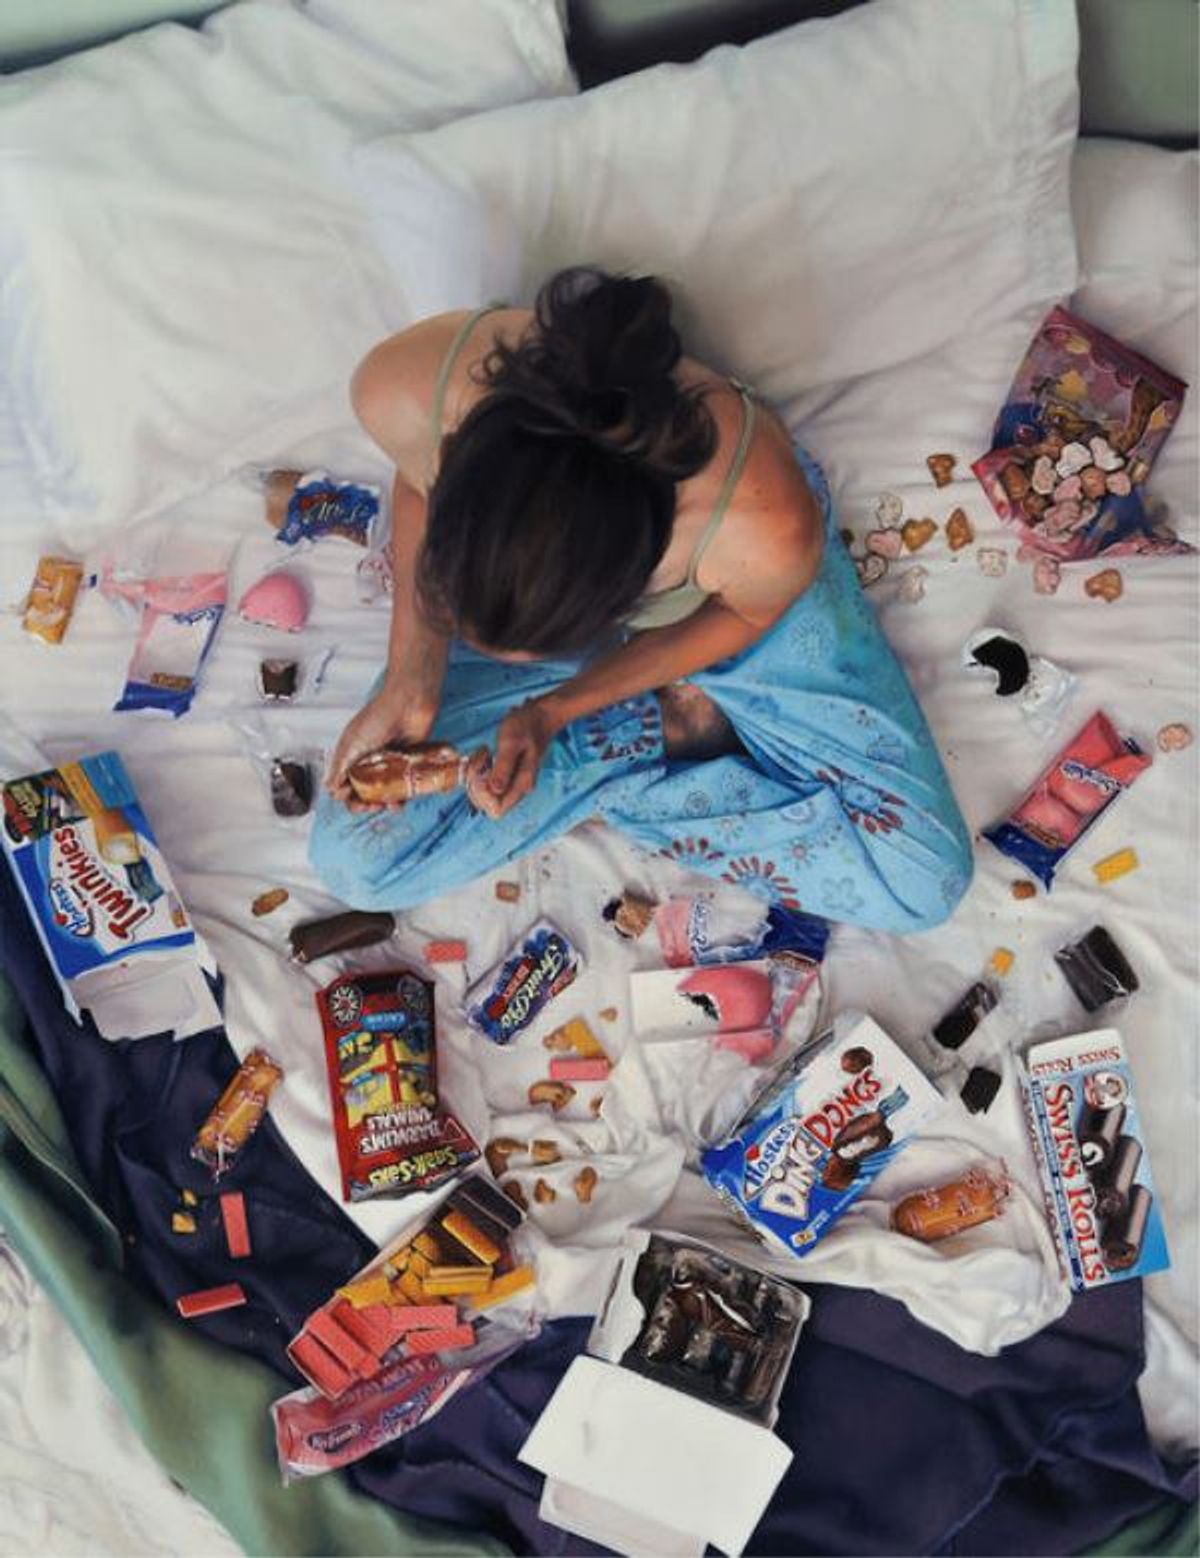 11 Things Girls Want When They're PMS-ing